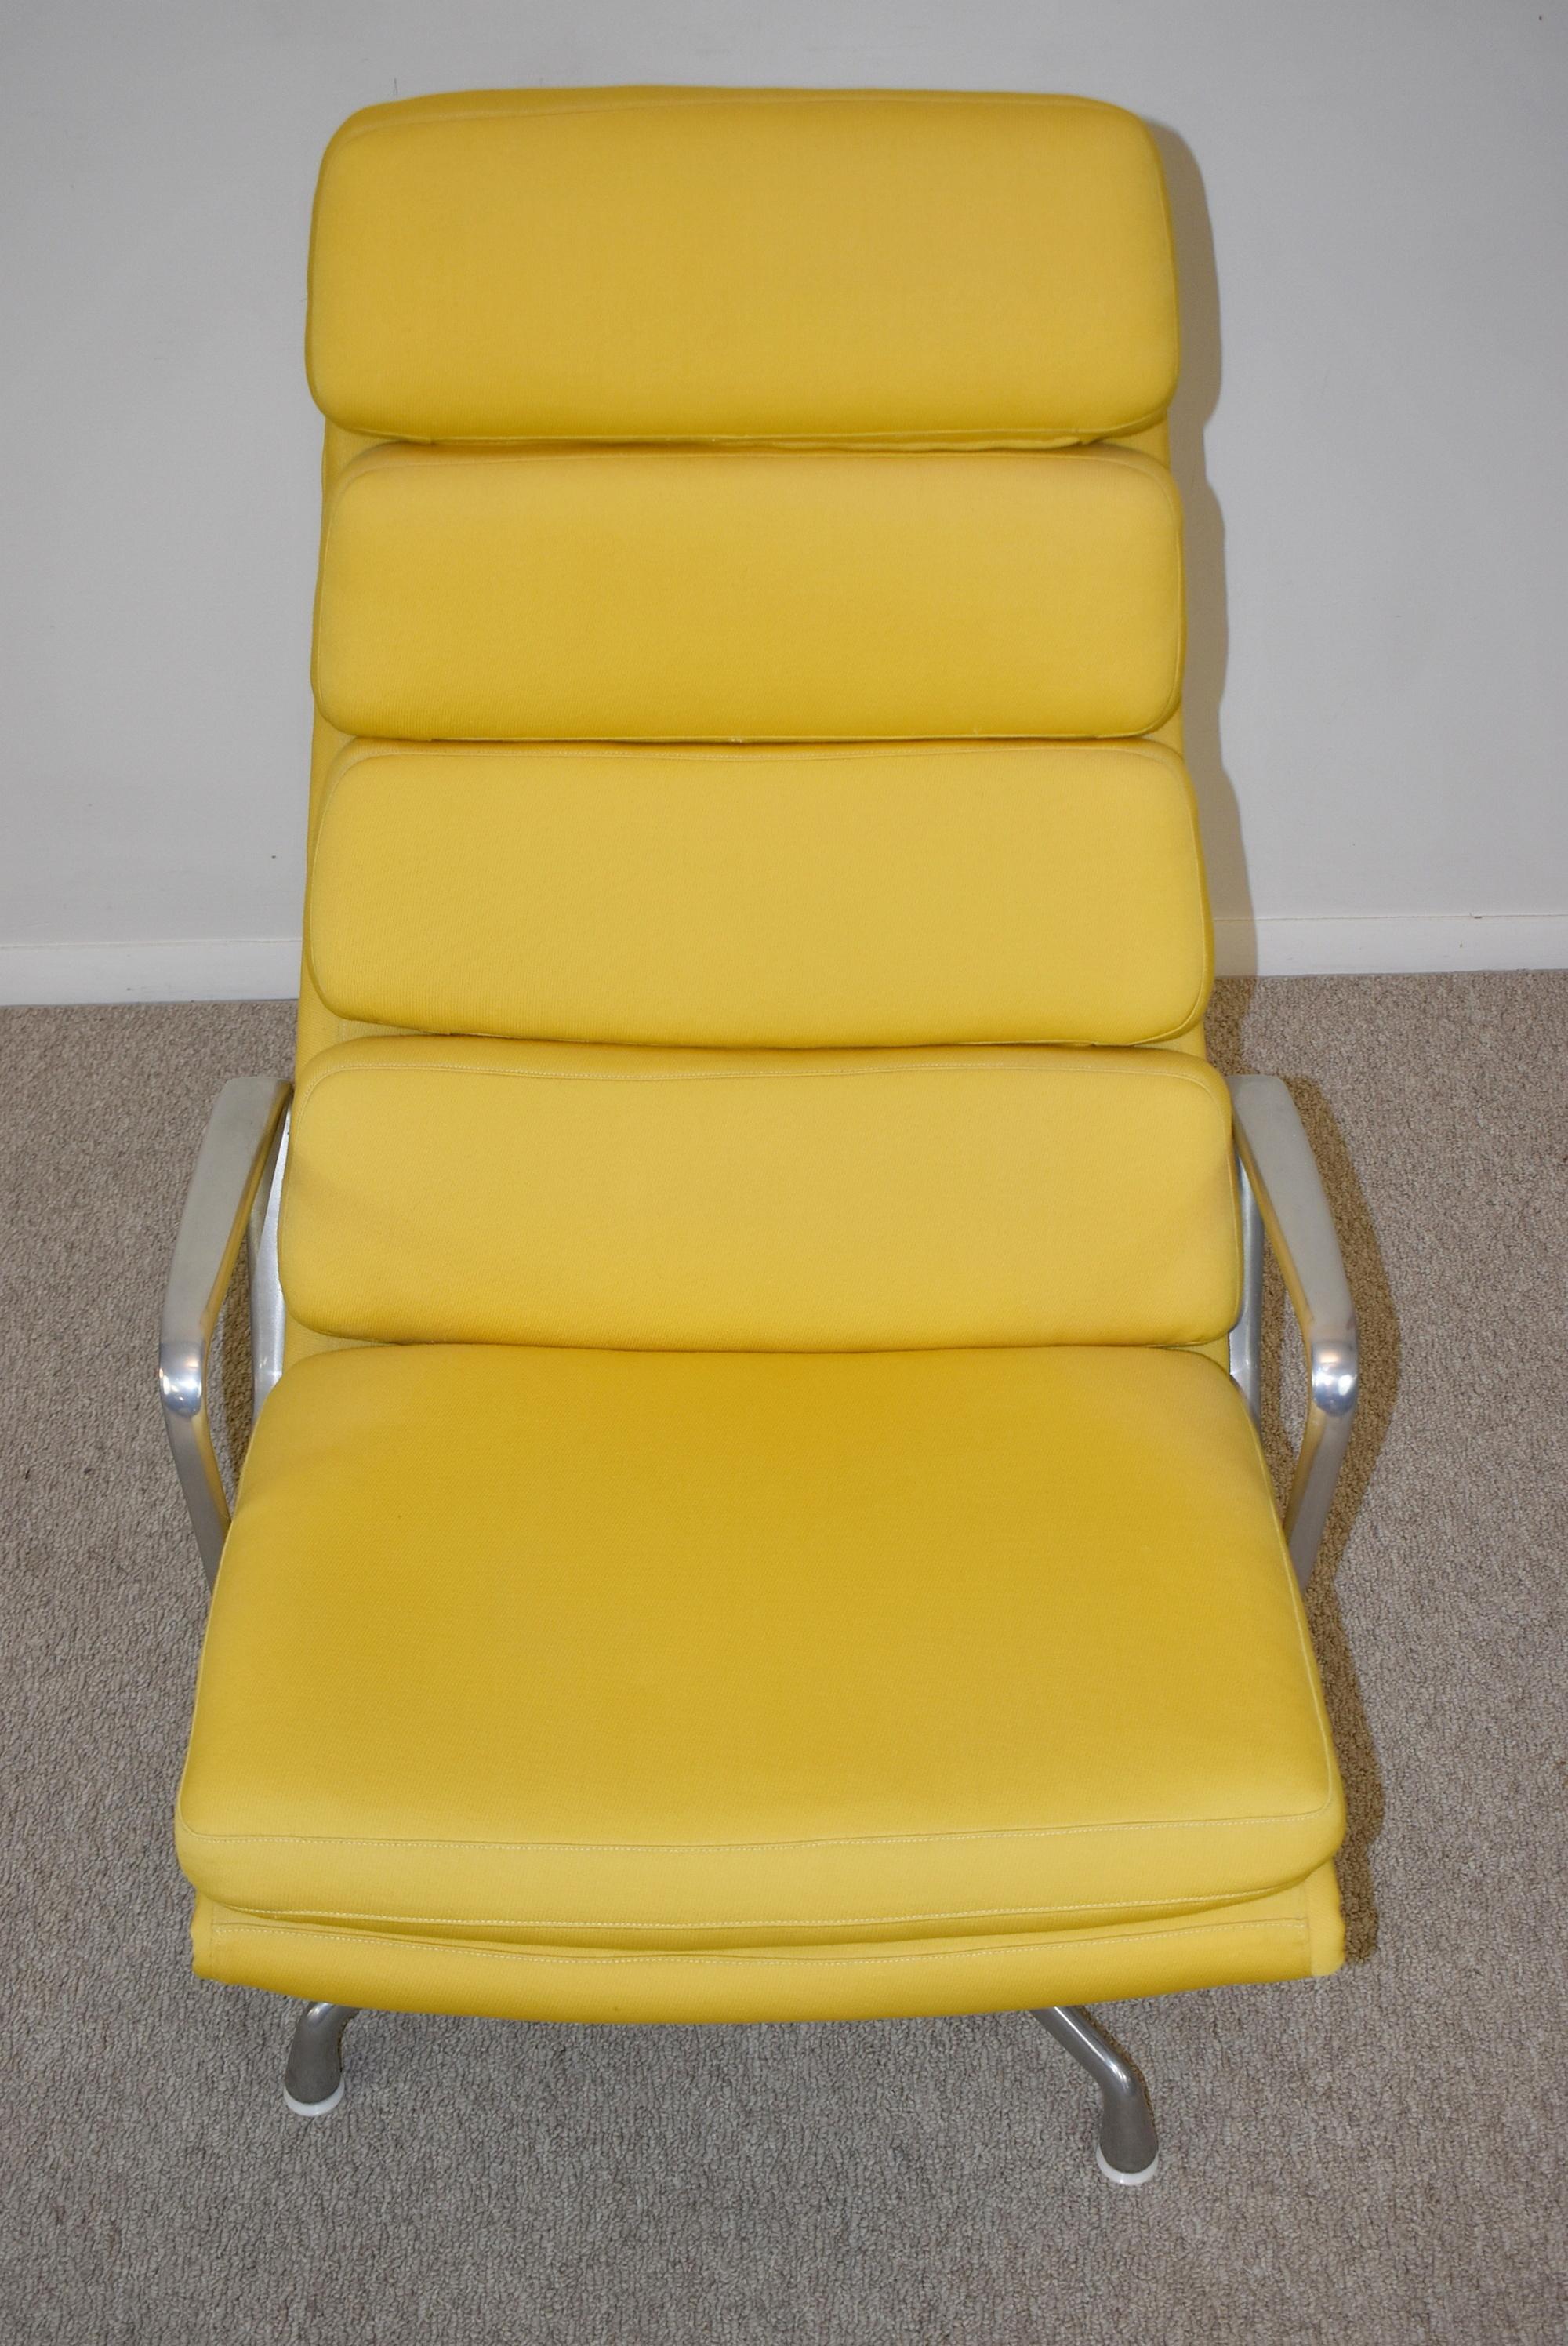 20th Century Eames Soft Pad Chair, Executive Height in Yellow for Herman Miller